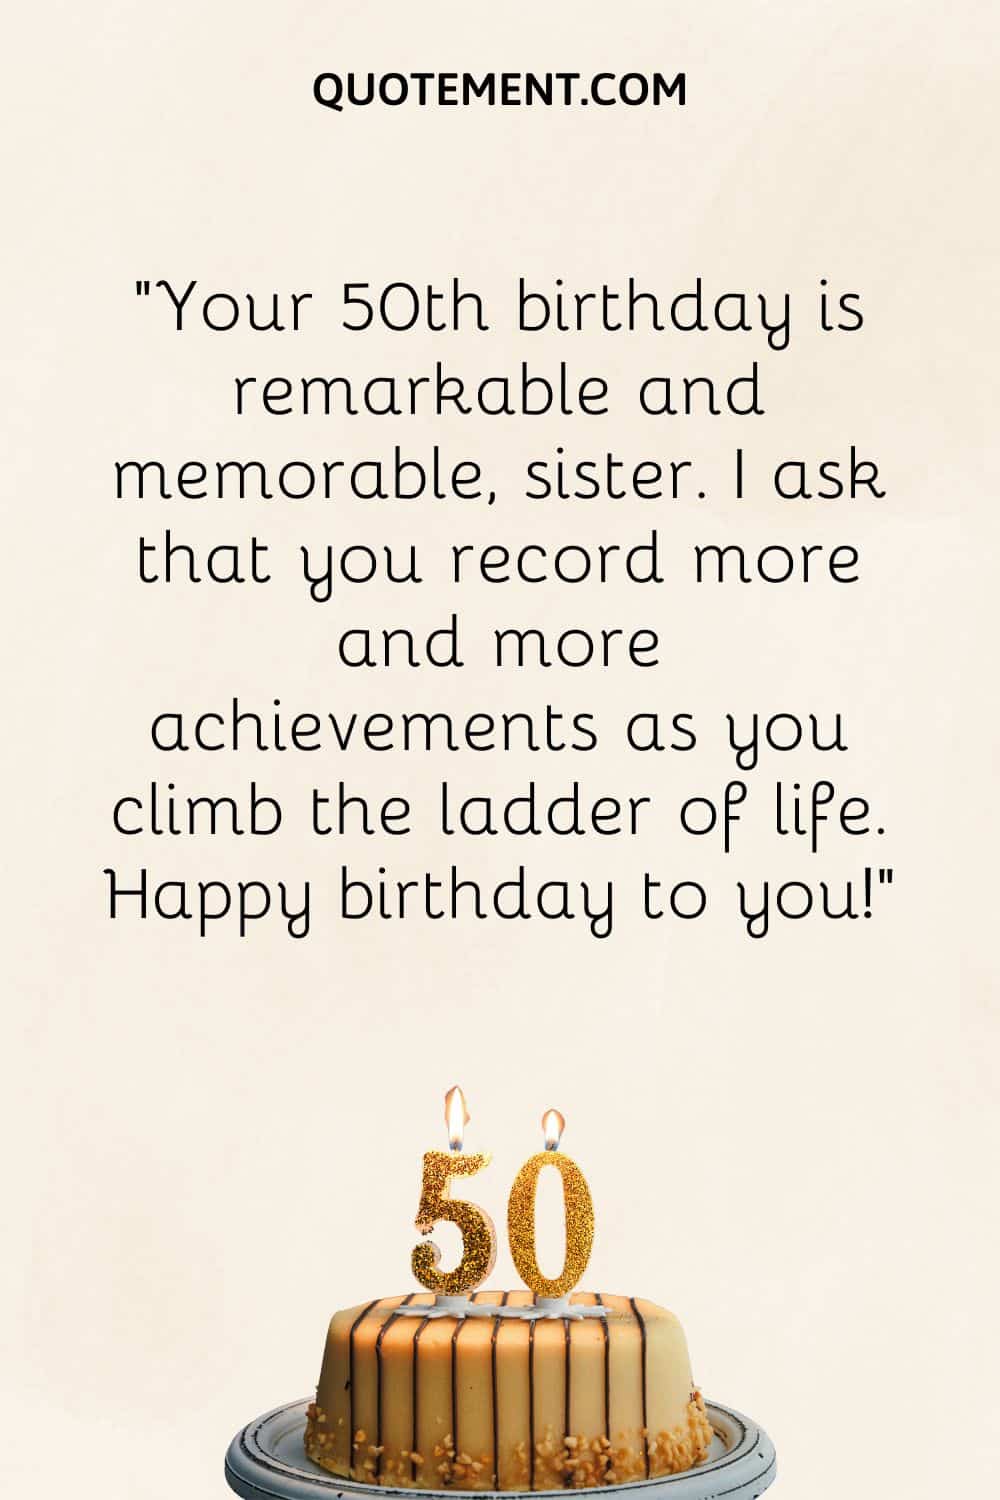 “Your 50th birthday is remarkable and memorable, sister. I ask that you record more and more achievements as you climb the ladder of life. Happy birthday to you!”